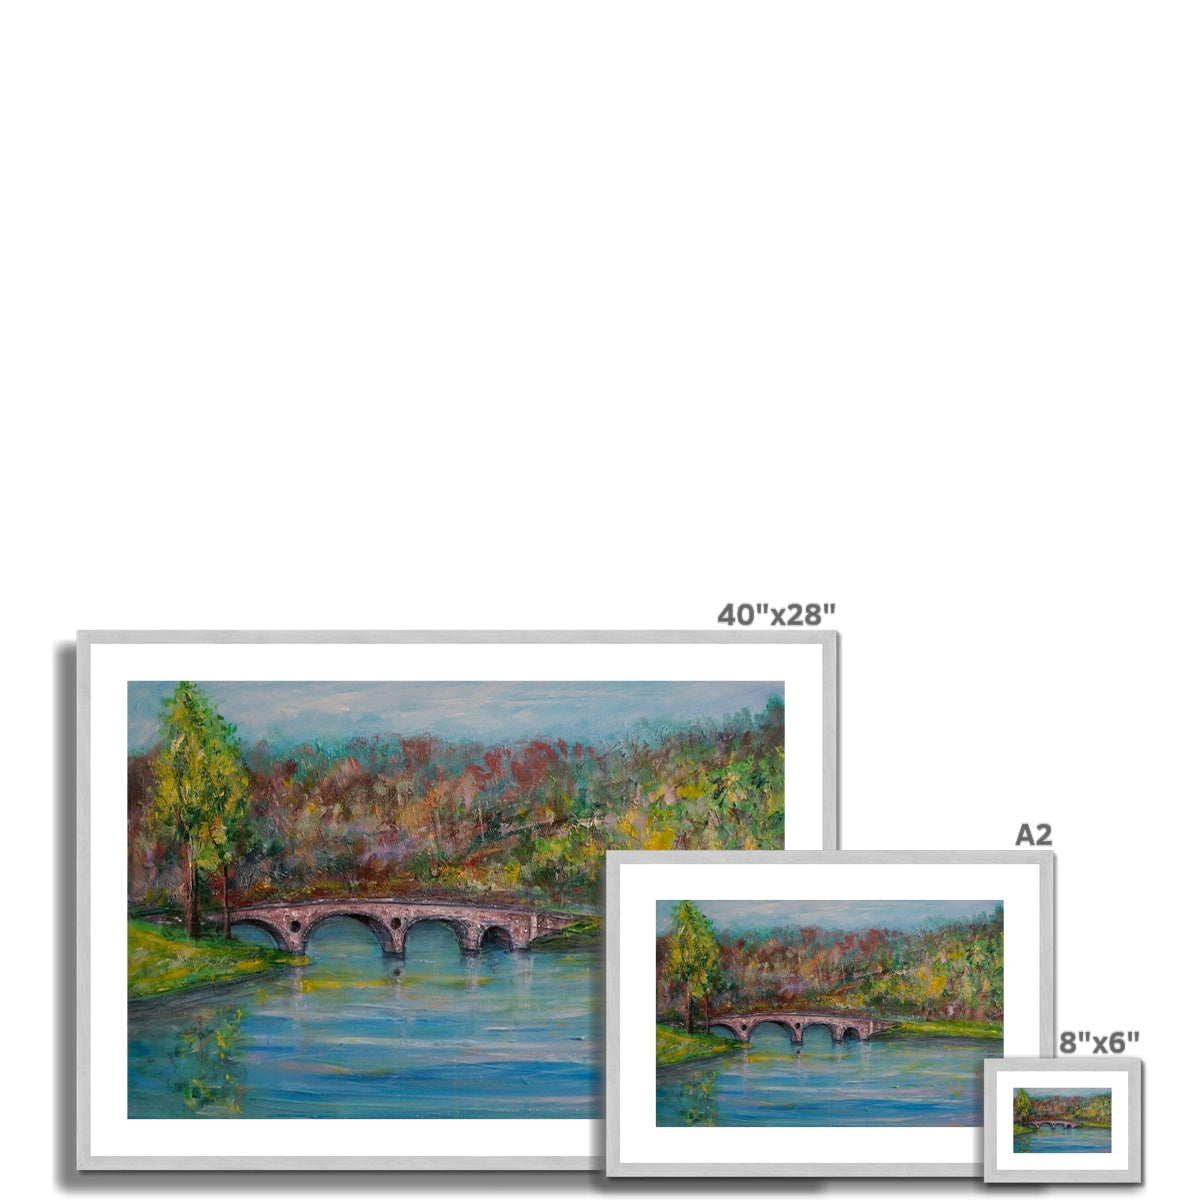 Kenmore Bridge Painting | Antique Framed & Mounted Prints From Scotland-Antique Framed & Mounted Prints-Scottish Highlands & Lowlands Art Gallery-Paintings, Prints, Homeware, Art Gifts From Scotland By Scottish Artist Kevin Hunter